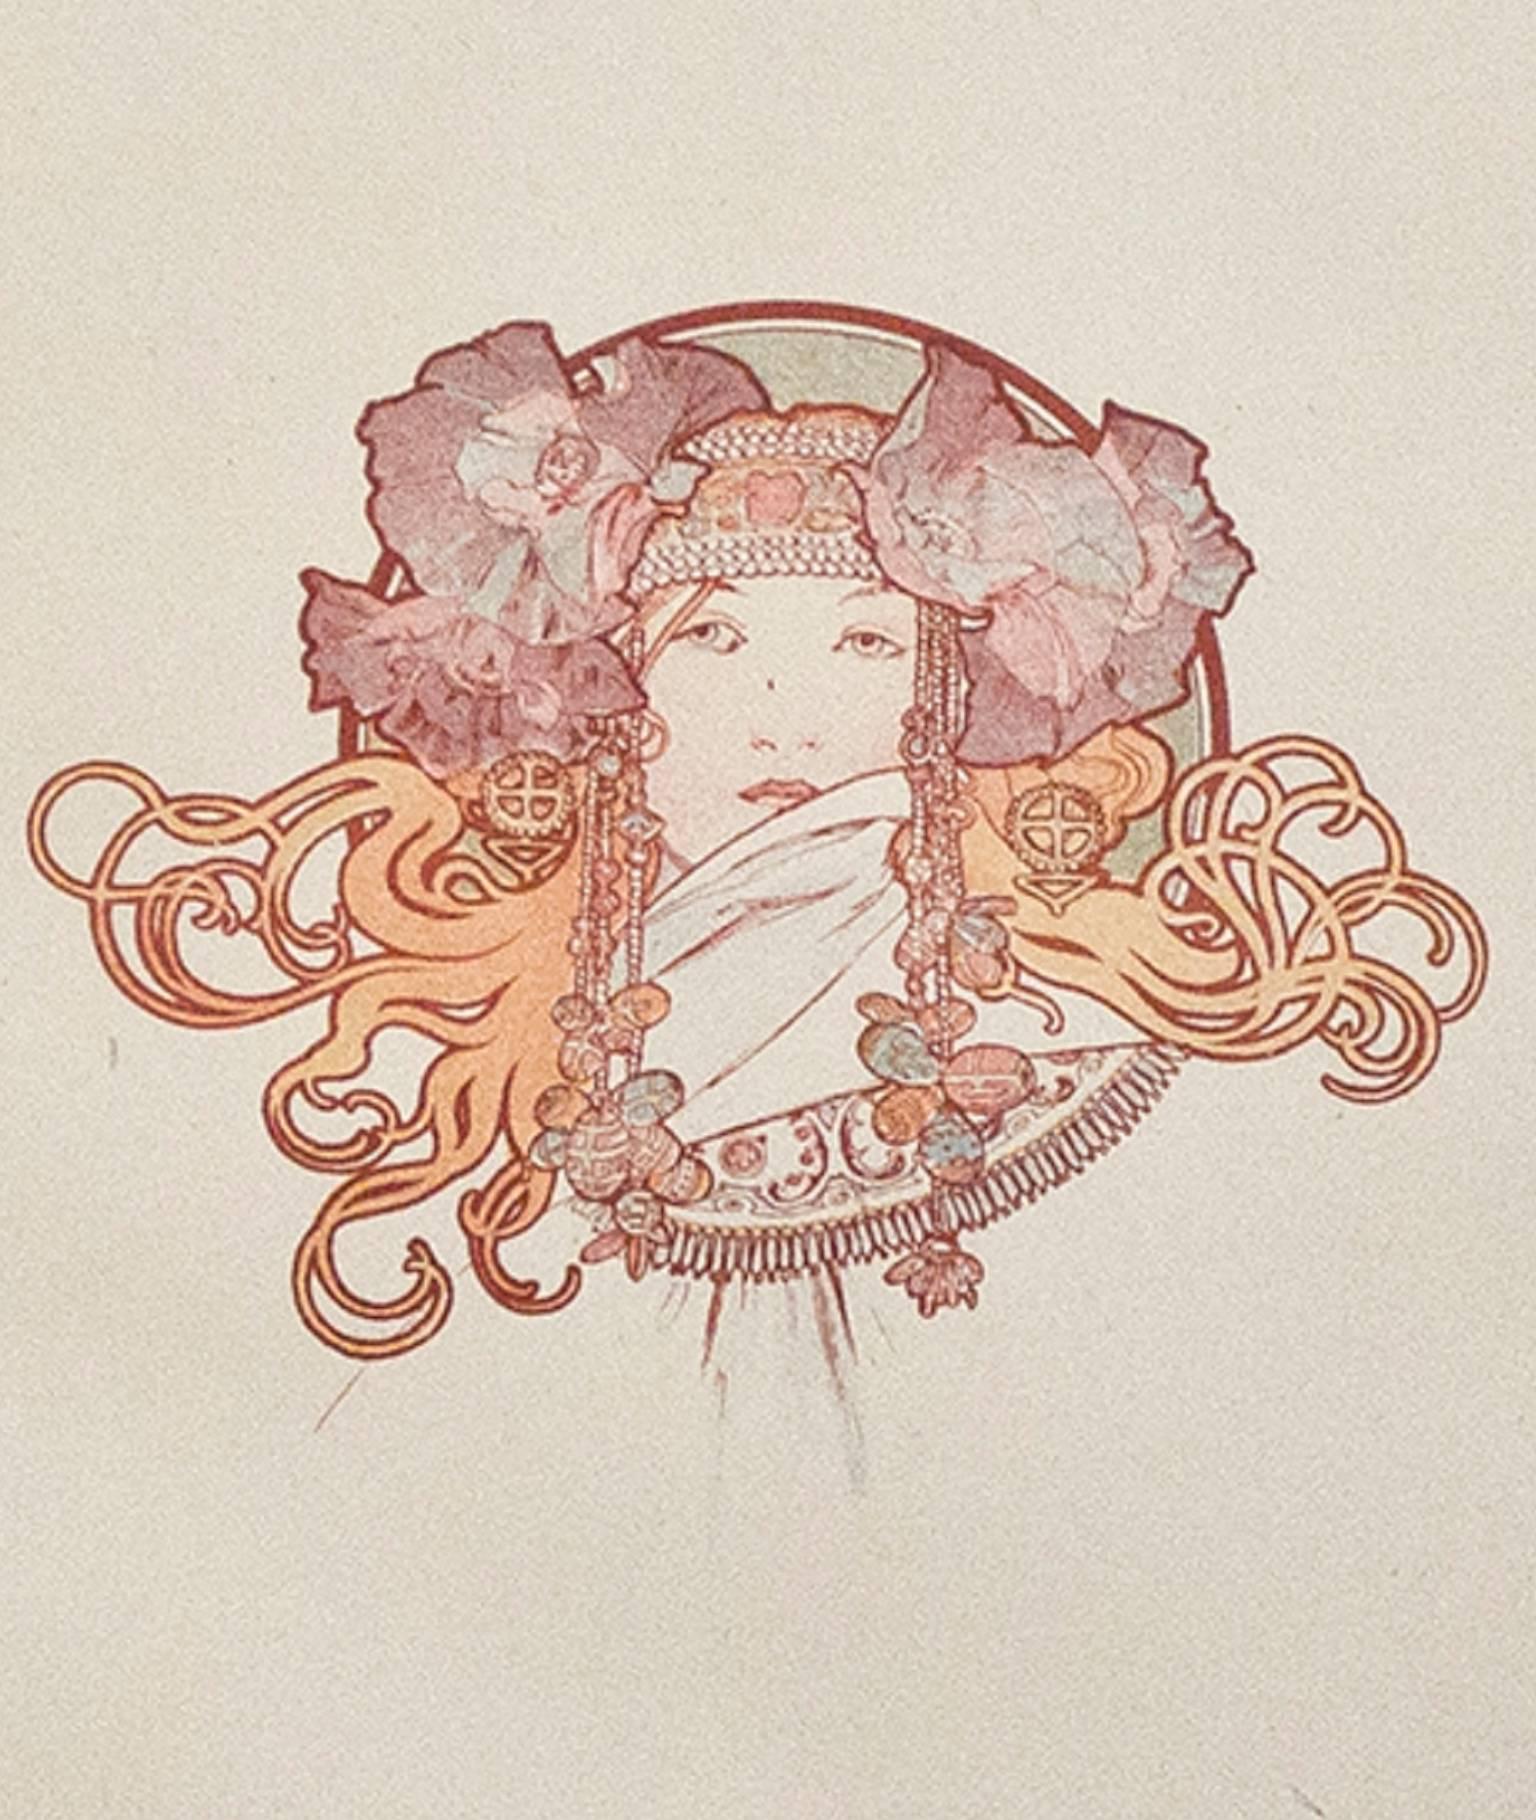  Late 19th century color lithograph art nouveau ornate bookplate female subject - Print by Alphonse Mucha